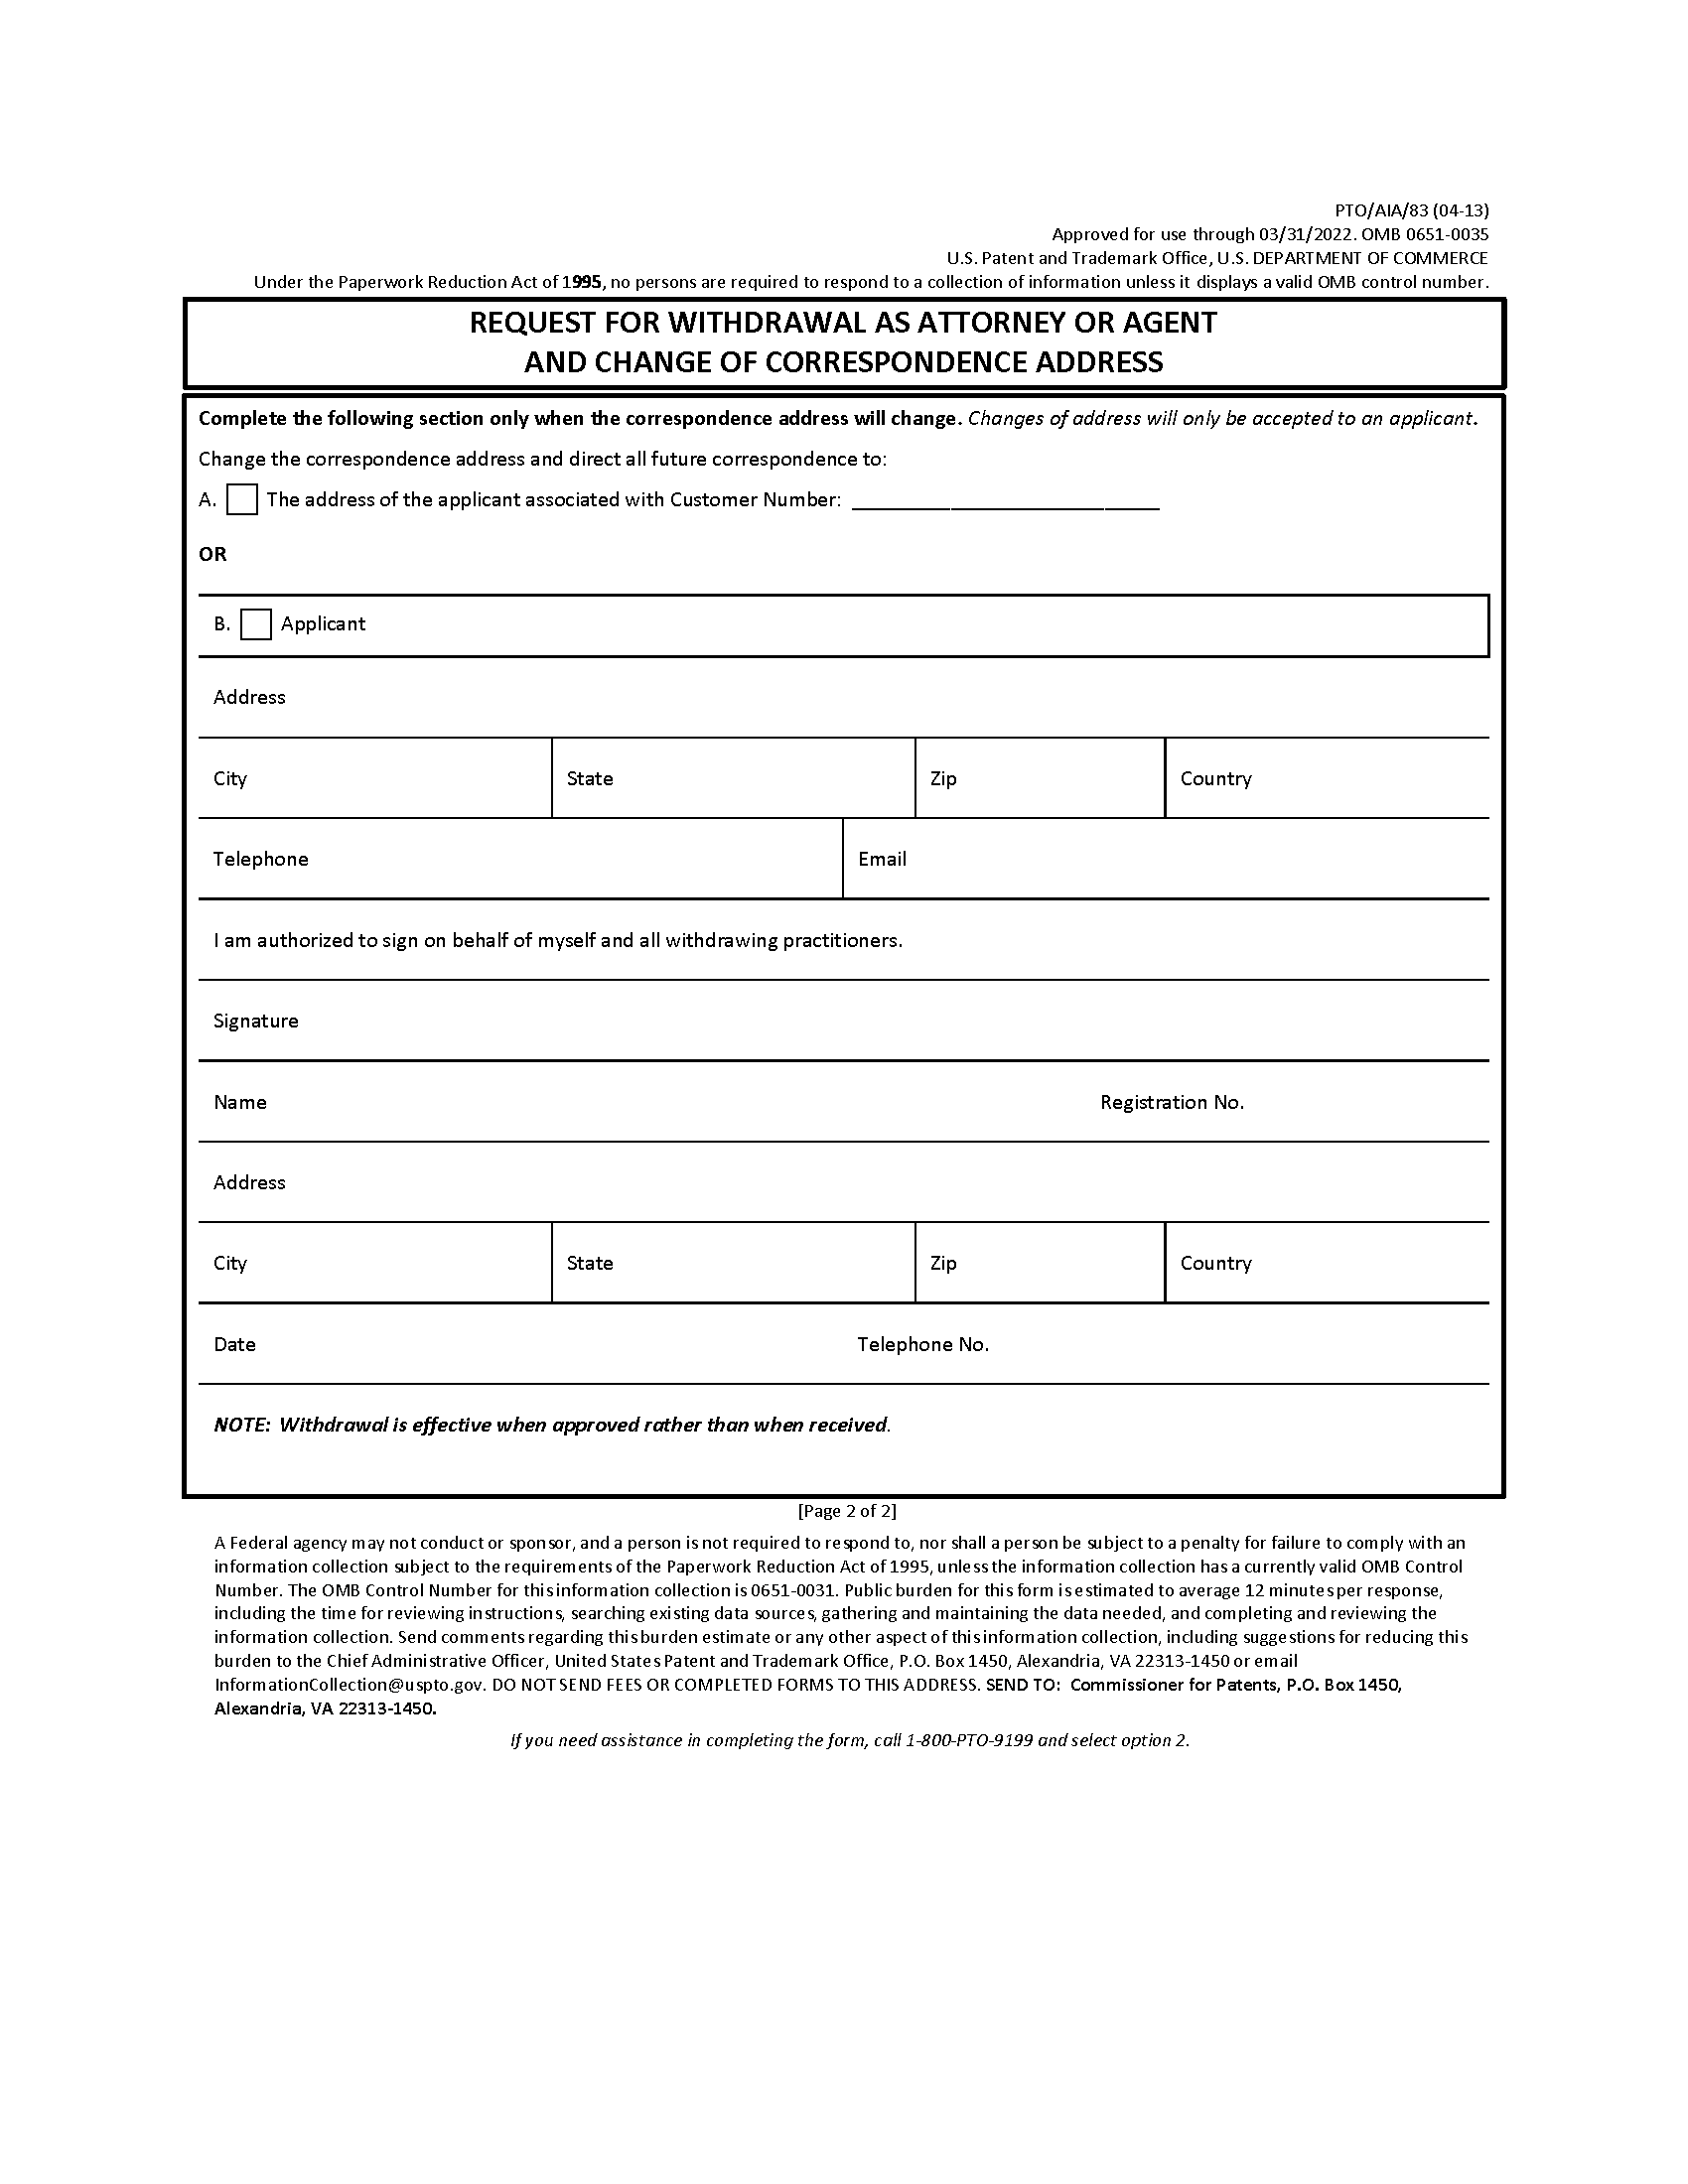 Form PTO/SB/83 Request for Withdrawl as Attorney or Agent And Change of Correspondence Address